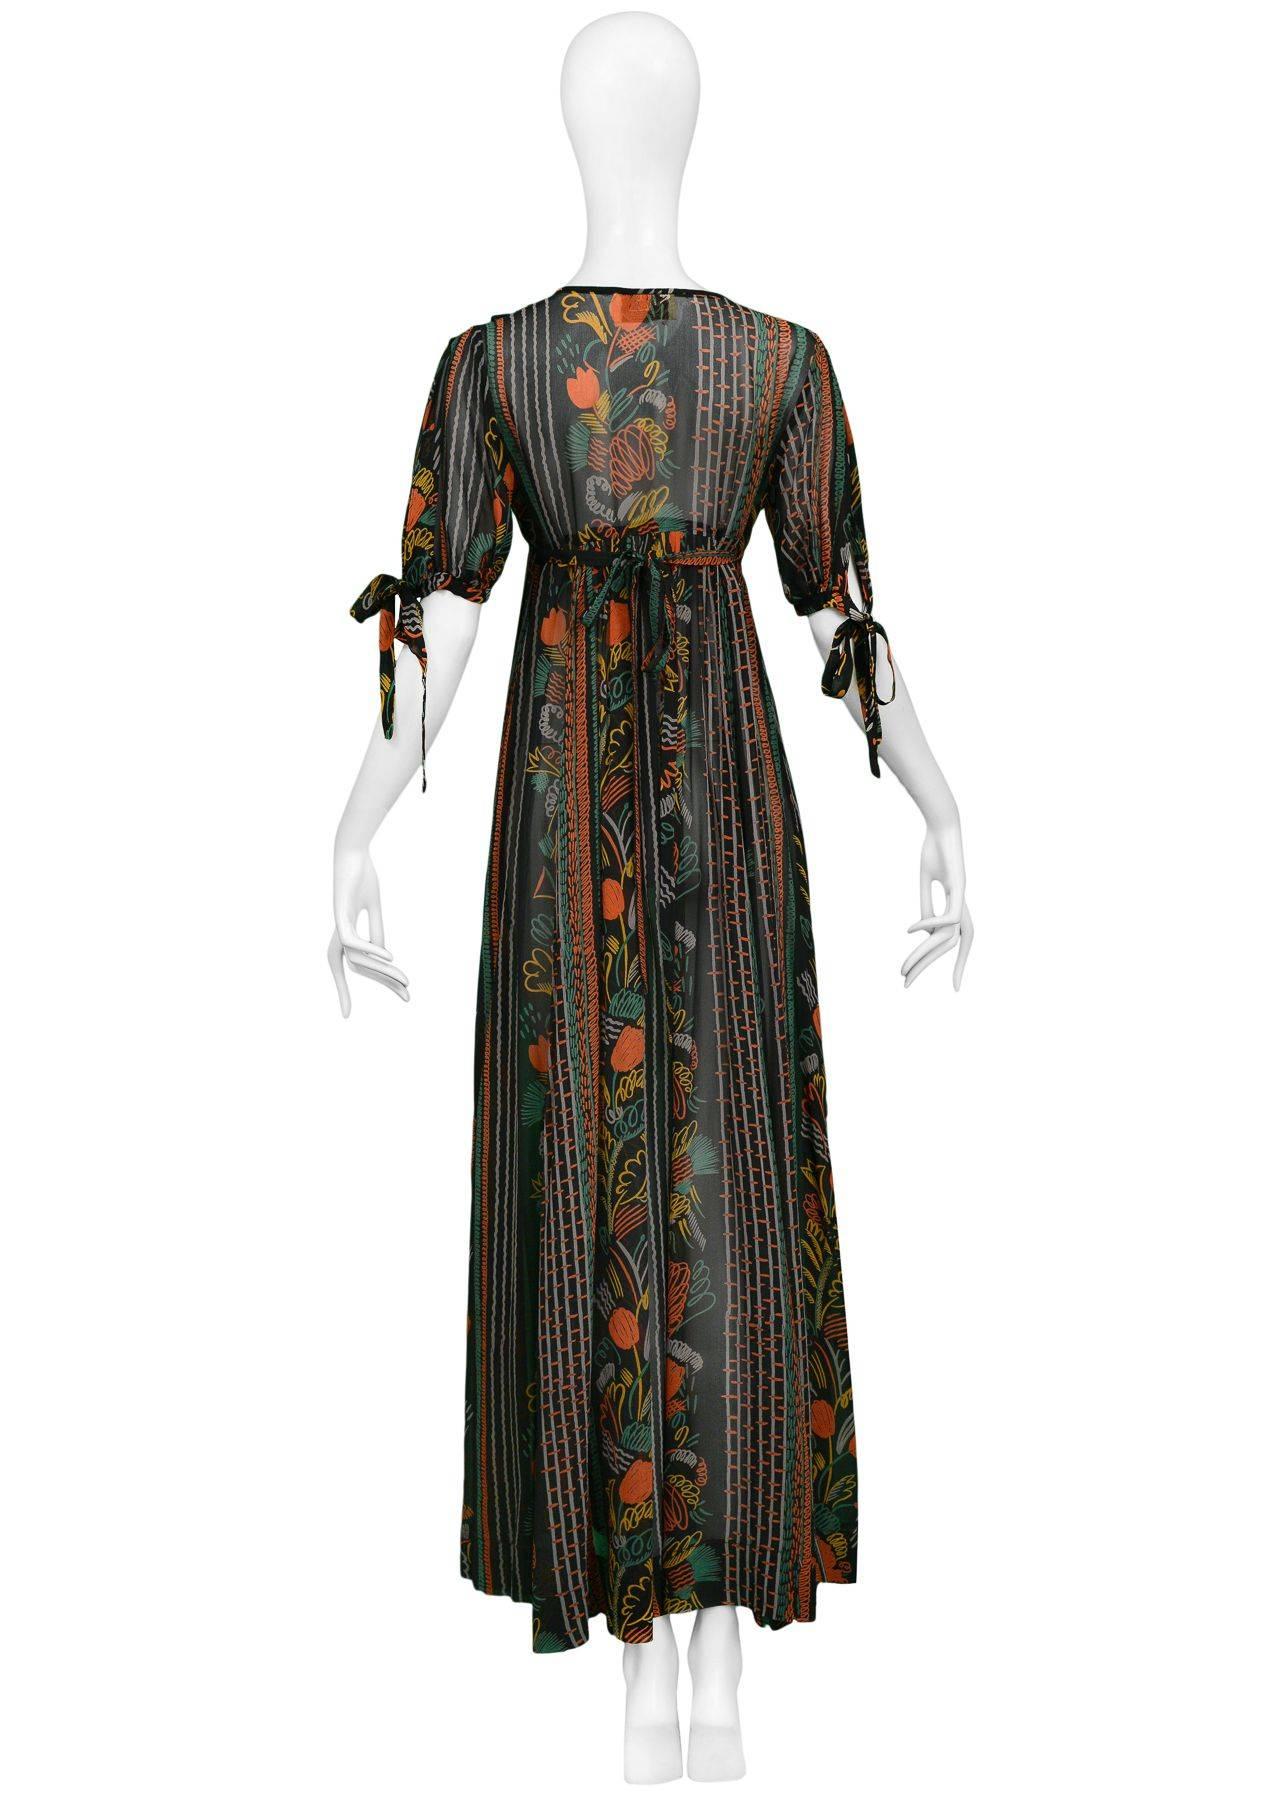 Ossie Clark Vintage Crepe Ruffle Dress with Celia Birtwell Print, 1960s In Excellent Condition In Los Angeles, CA